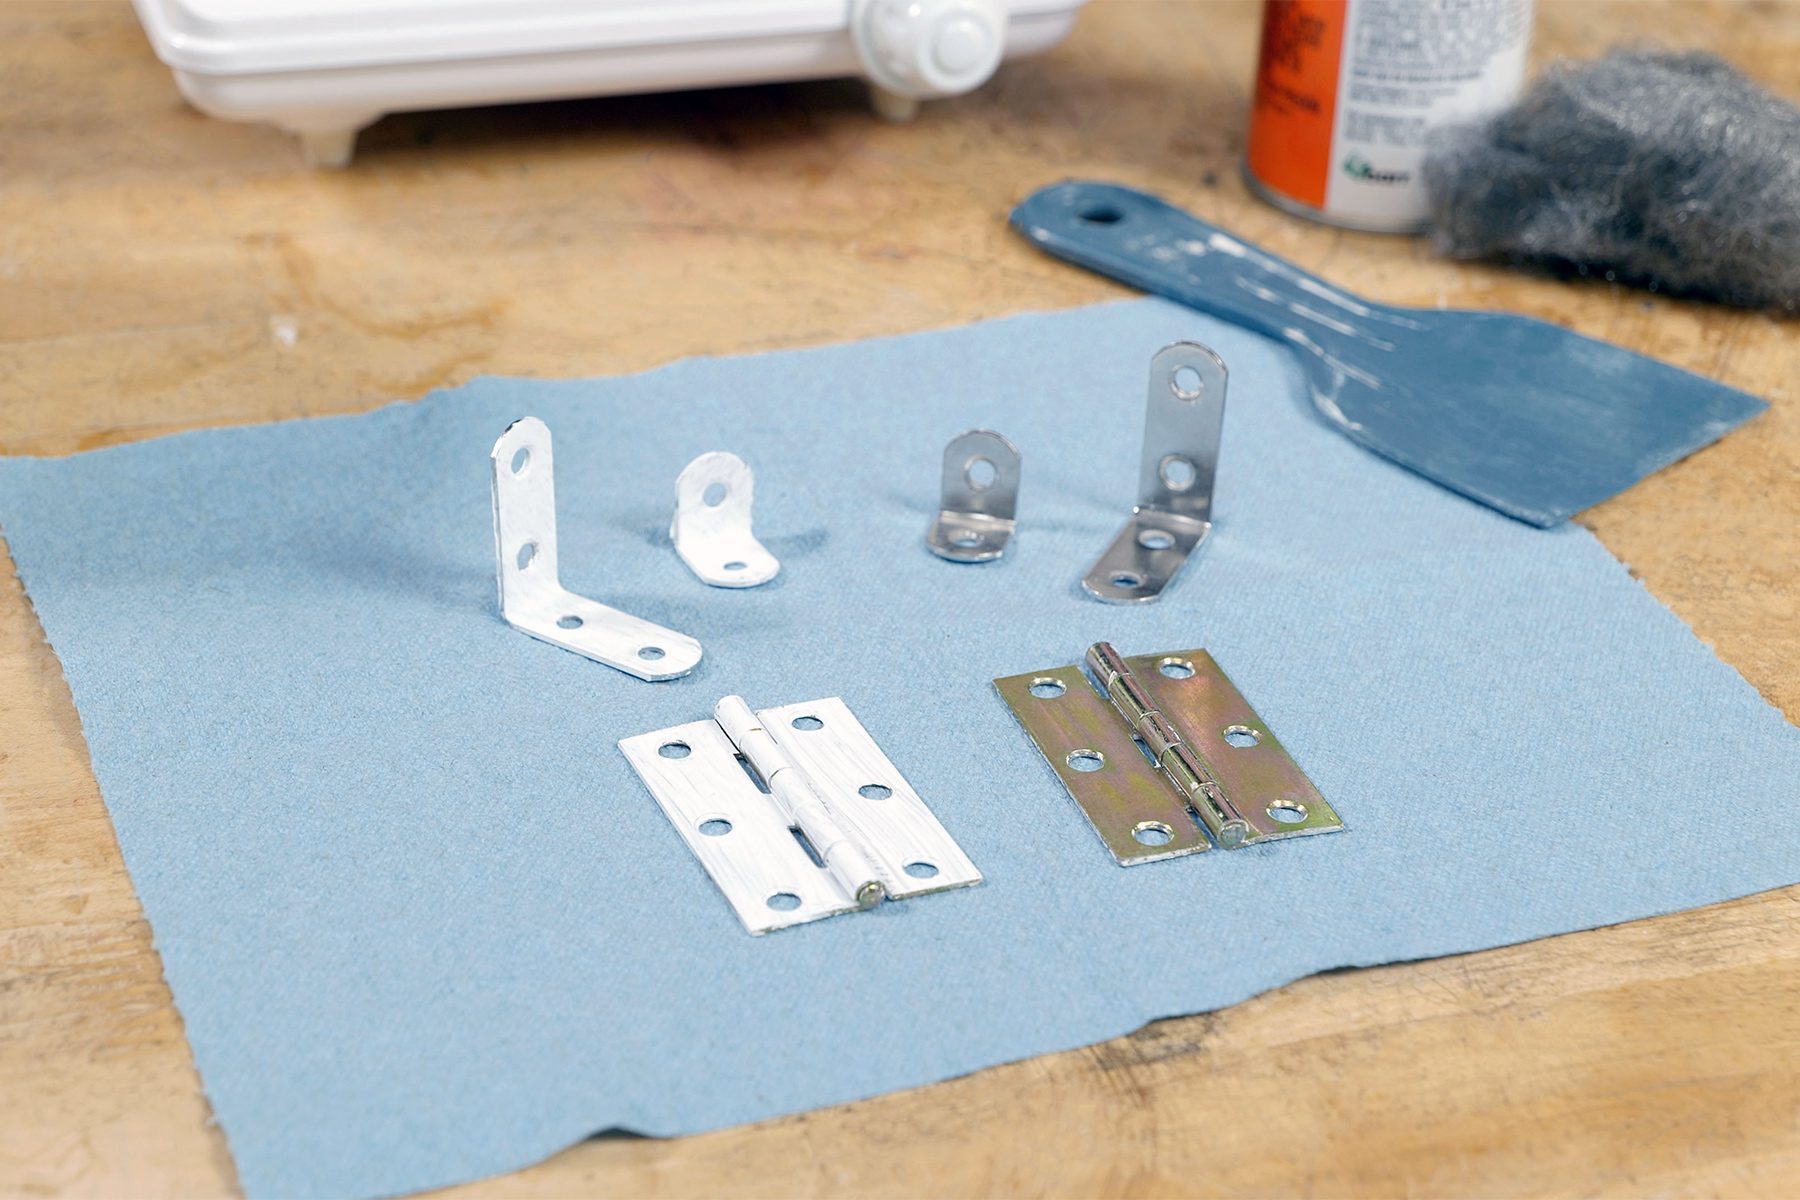 Different types of metal brackets and hinges are arranged on a blue cloth. A putty knife, a container, and other tools are visible in the background on a wooden surface.